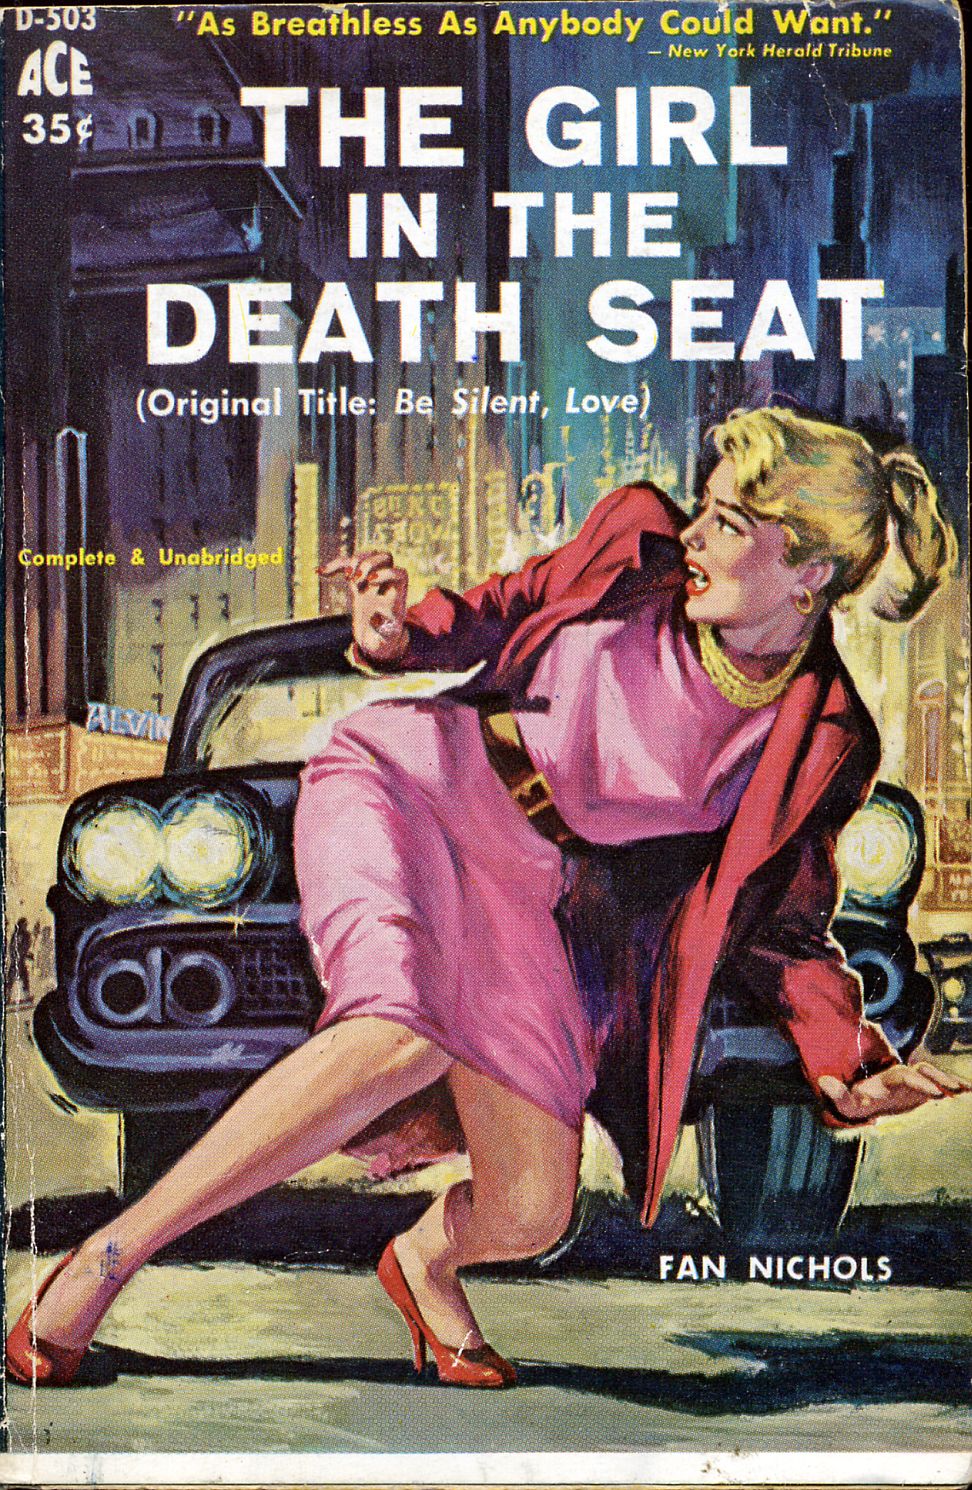 The Girl in the Death Seat, Ace D-503, 1960